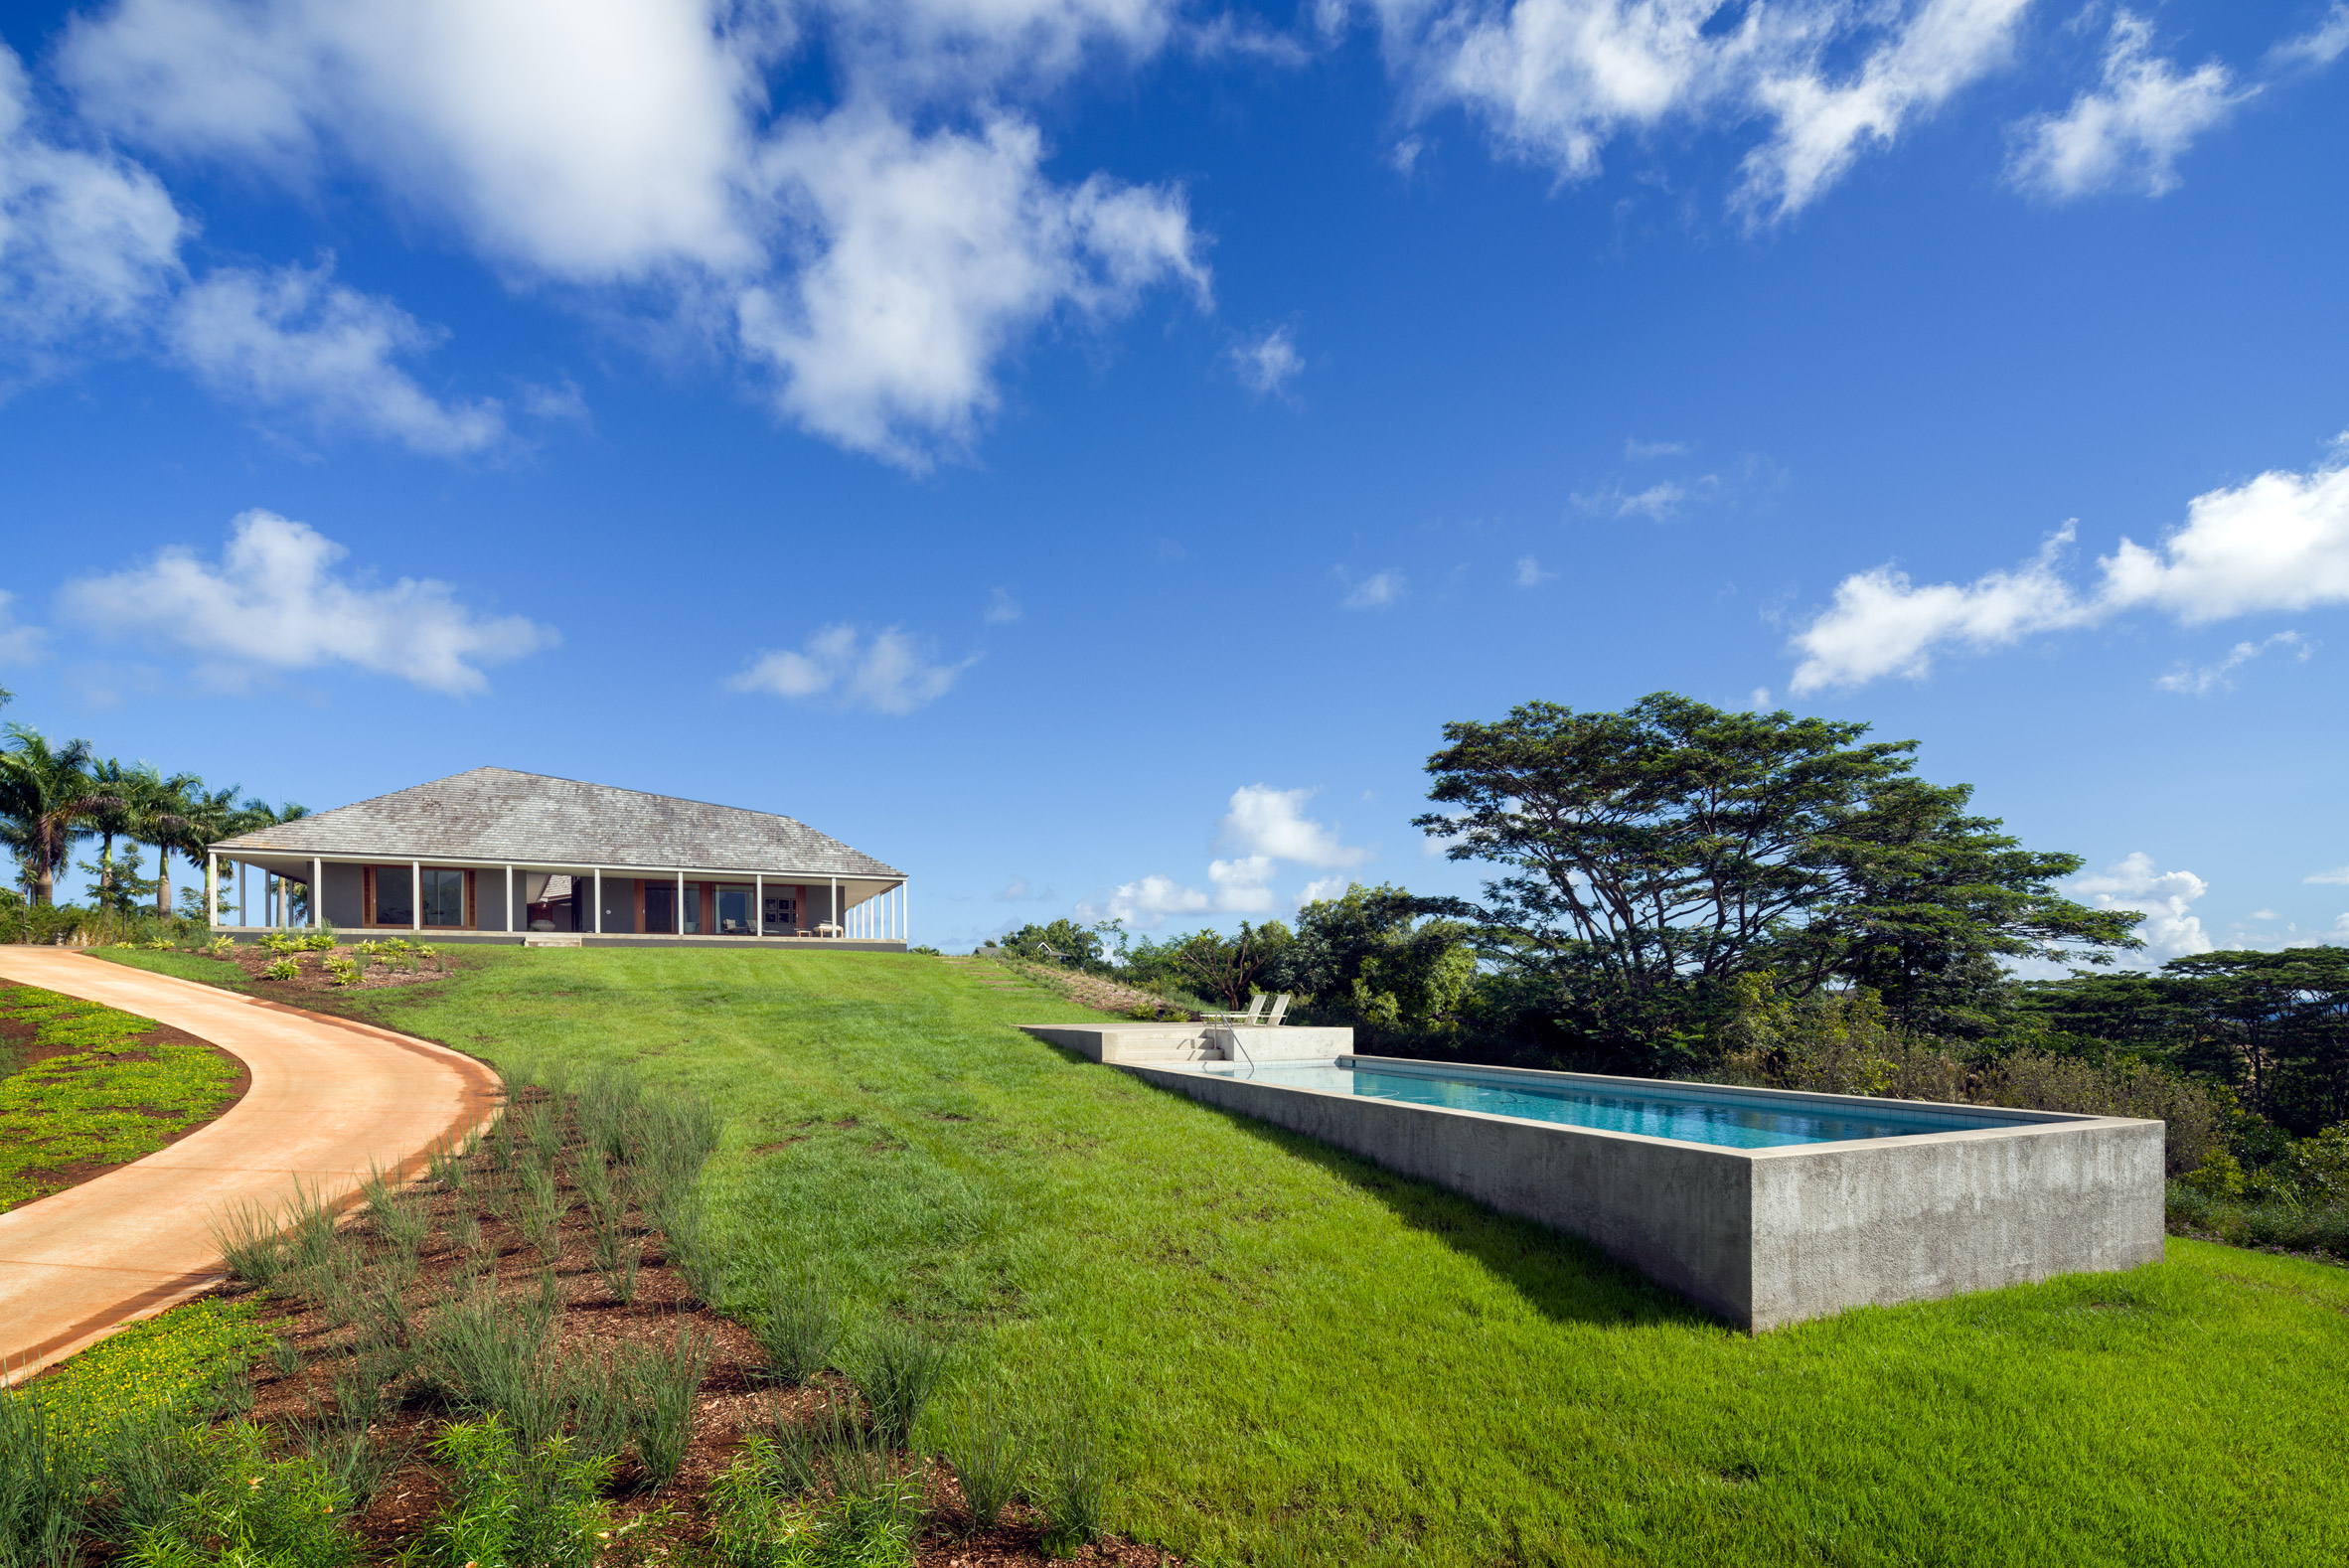 Massive angular roof spans four parts of Hawaiian home by Johnston Marklee